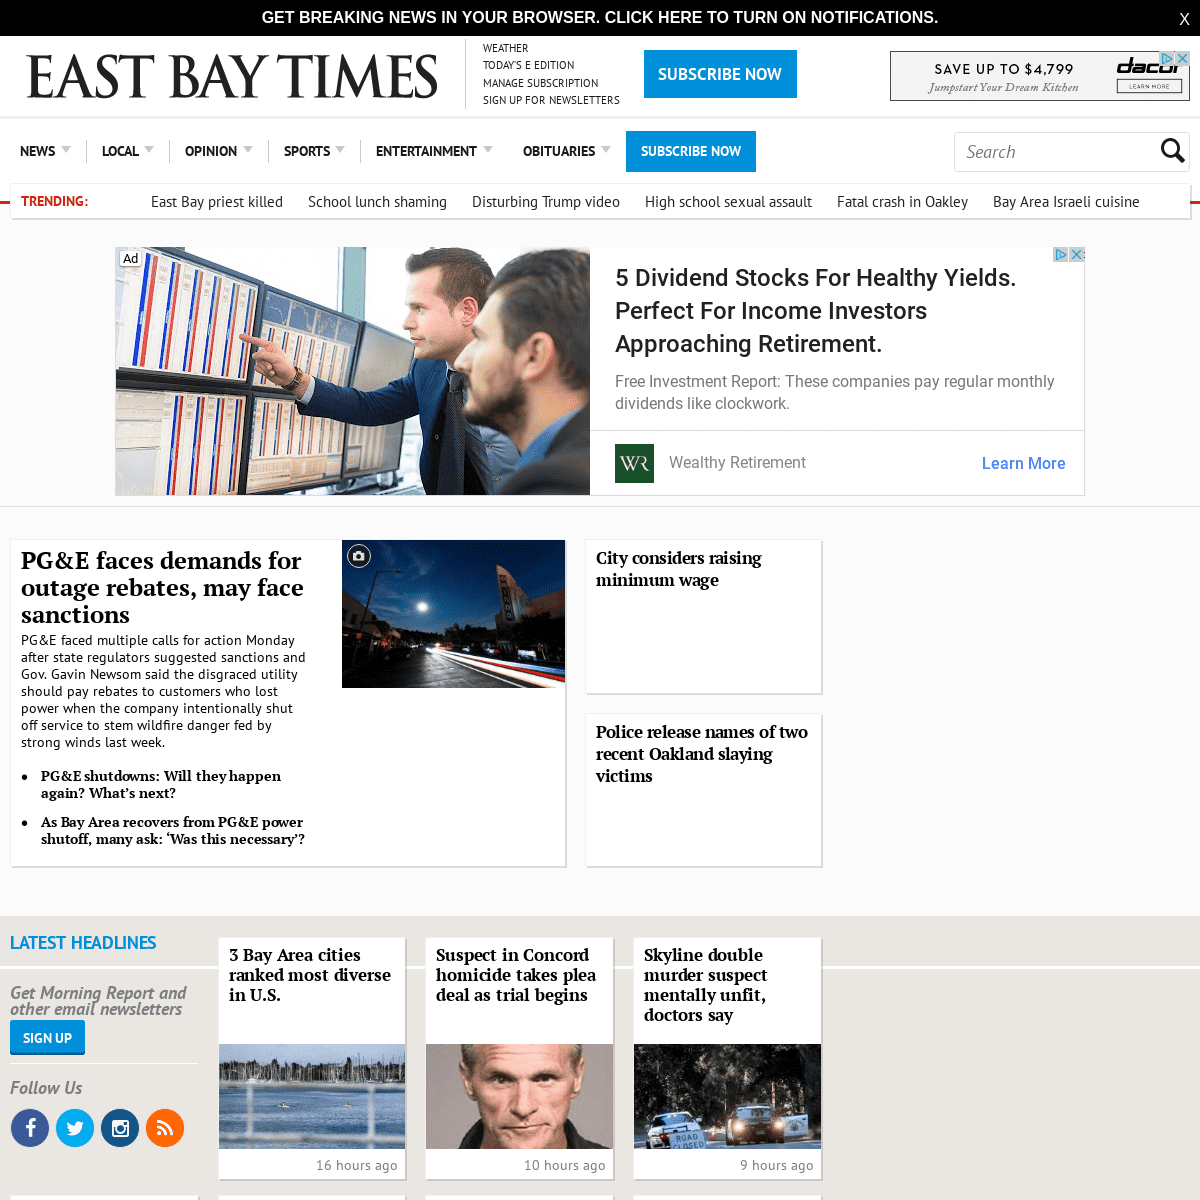 A complete backup of eastbaytimes.com